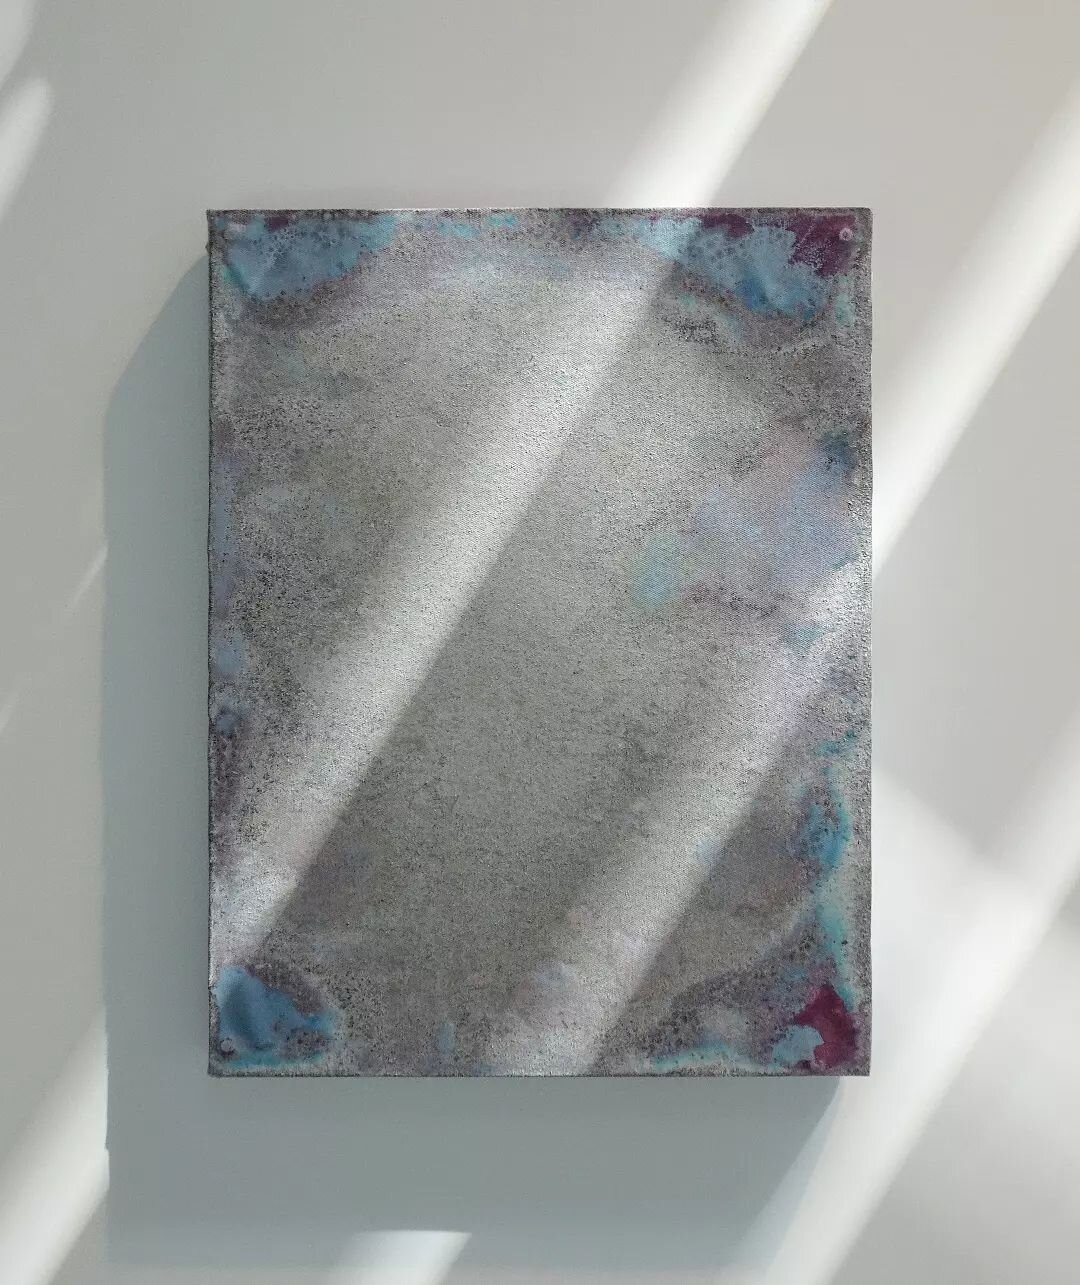 Unruly Painting, May 2022 - present
humidity indicator, water, aluminum sheet, canvas
40x30 cm

Work shown in the group exhibition BIOTOPIA
curated by Marie du Chastel @mariekik
@lepavillonnamur

#biotopia #lepavillonnamur #unrulypainting&nbsp;#muesl